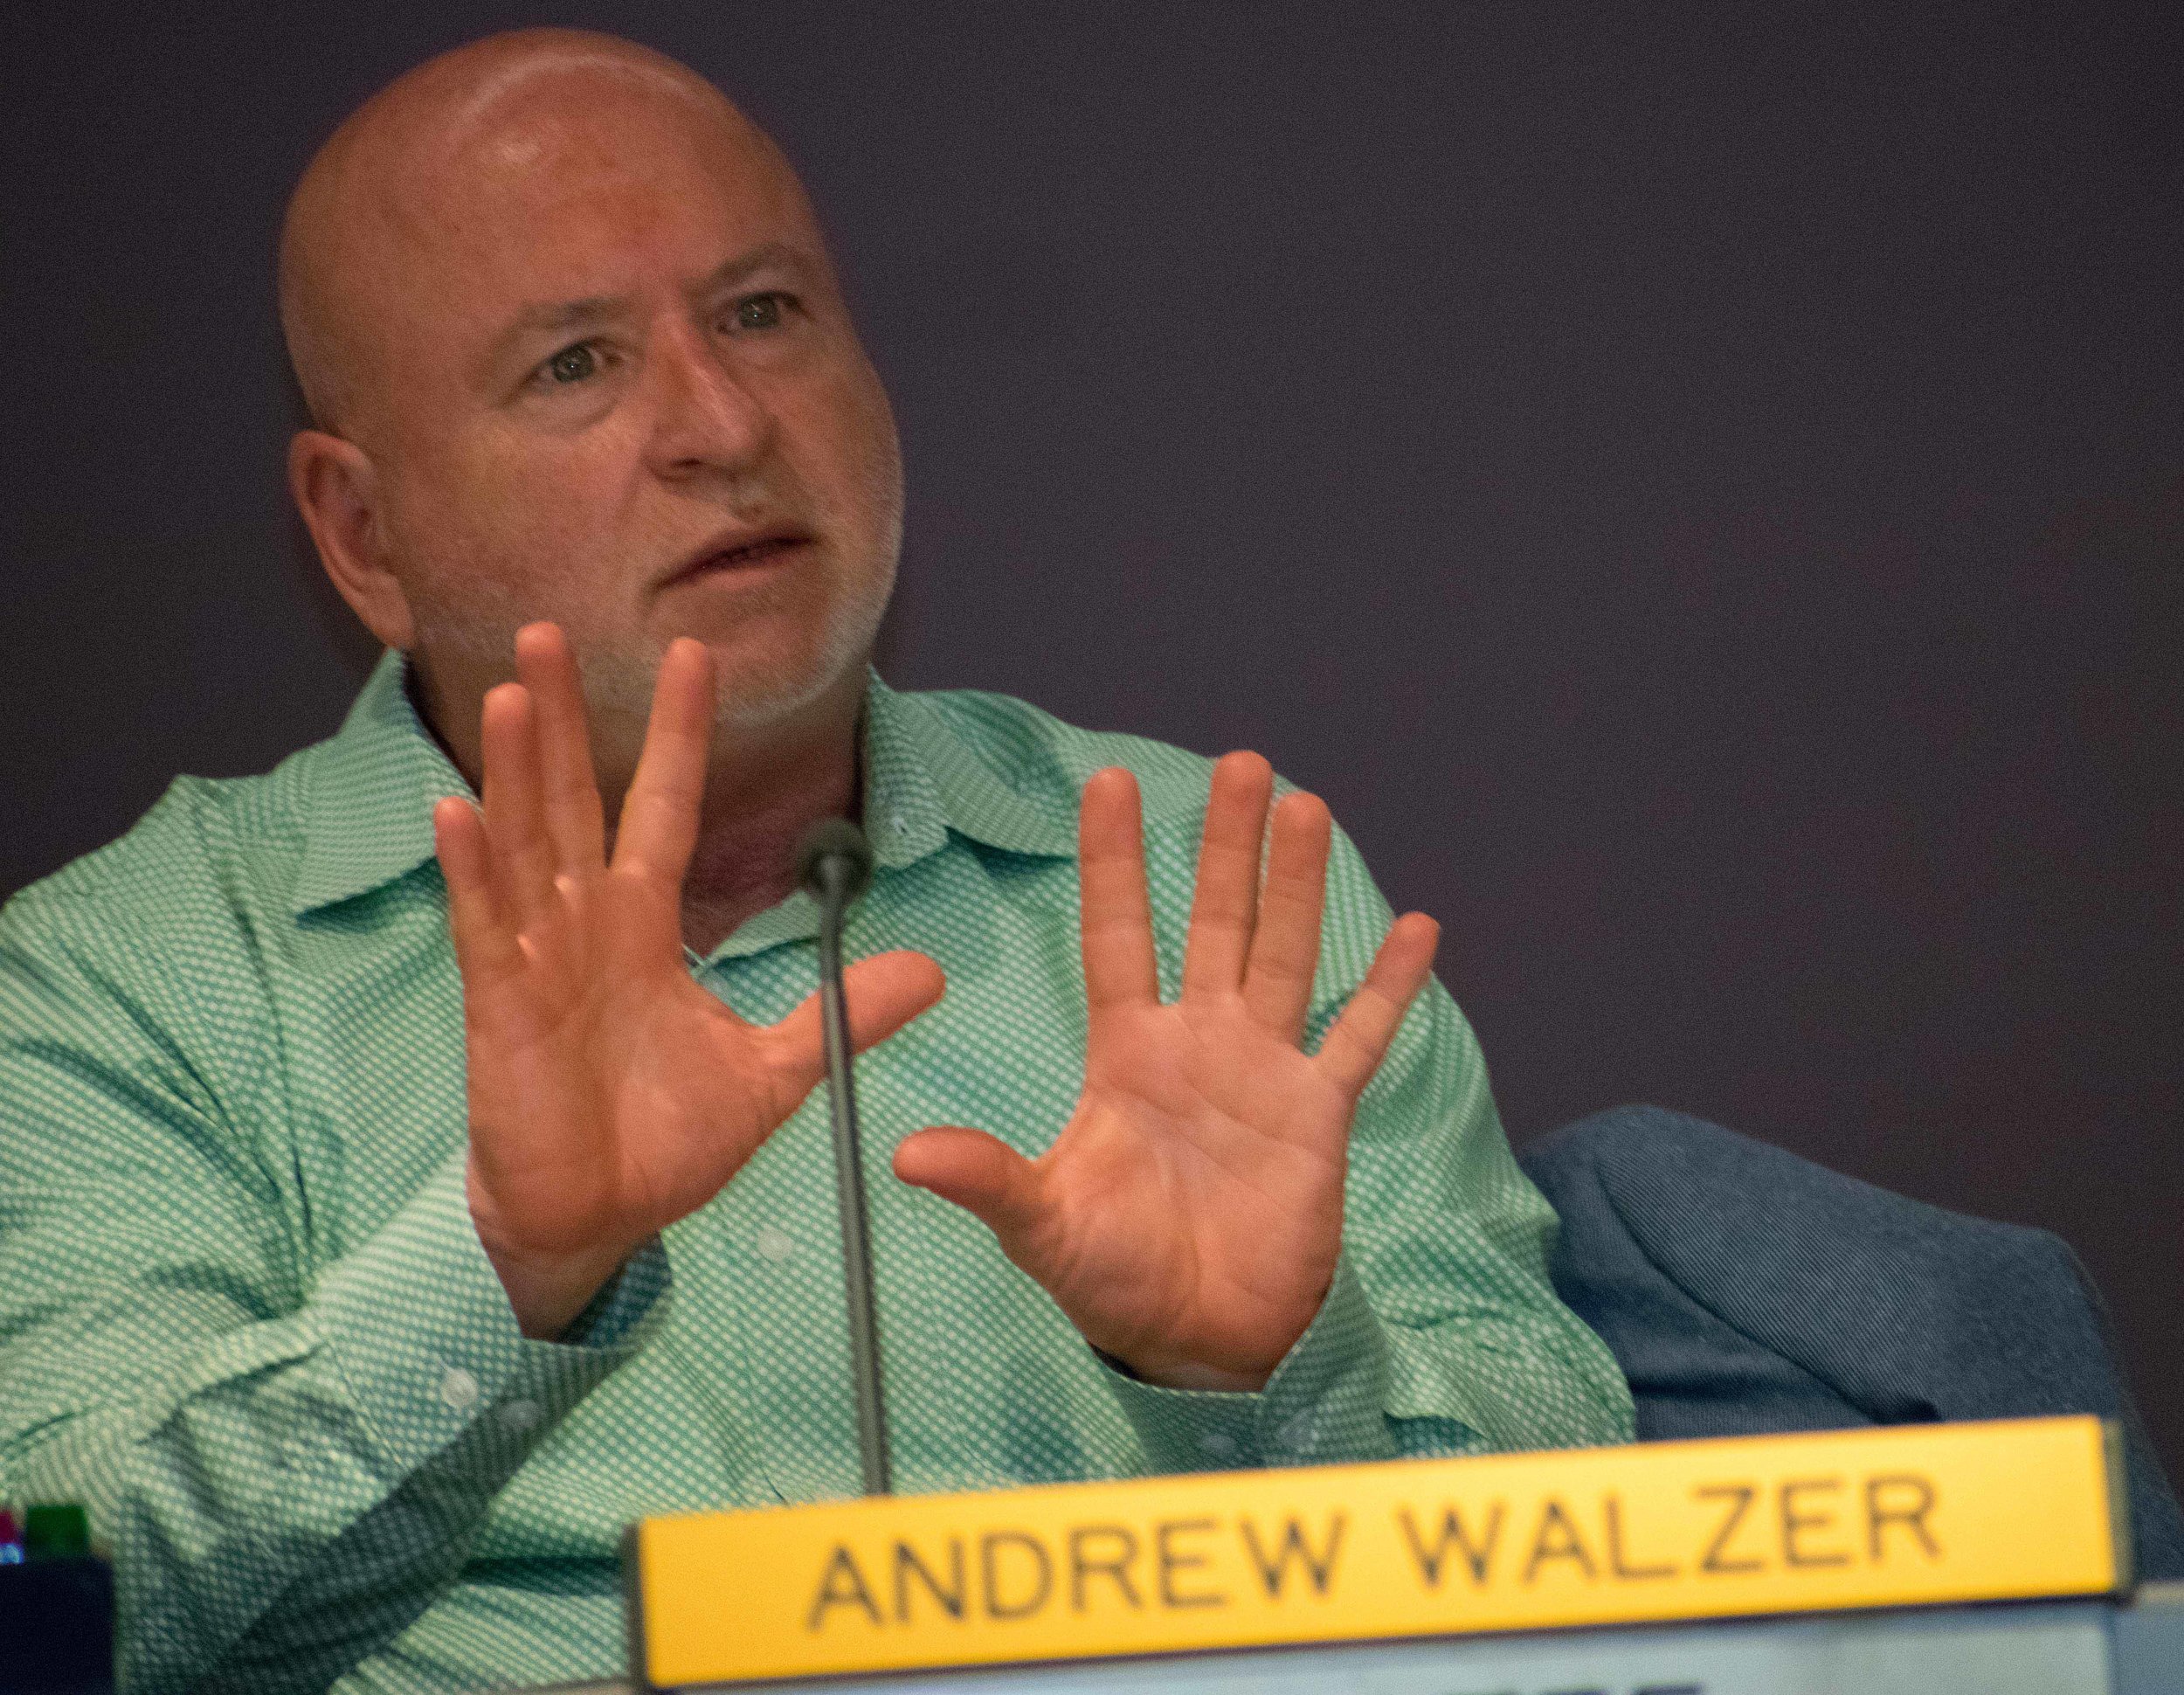  Trustee Dr. Andrew Walzer sits alongside the Santa Monica College board of trustees (not pictured) on Tuesday, April 3 during the monthly meetings at Santa Monica, California. Walzer is addressing the board about his view on a contract for an automa